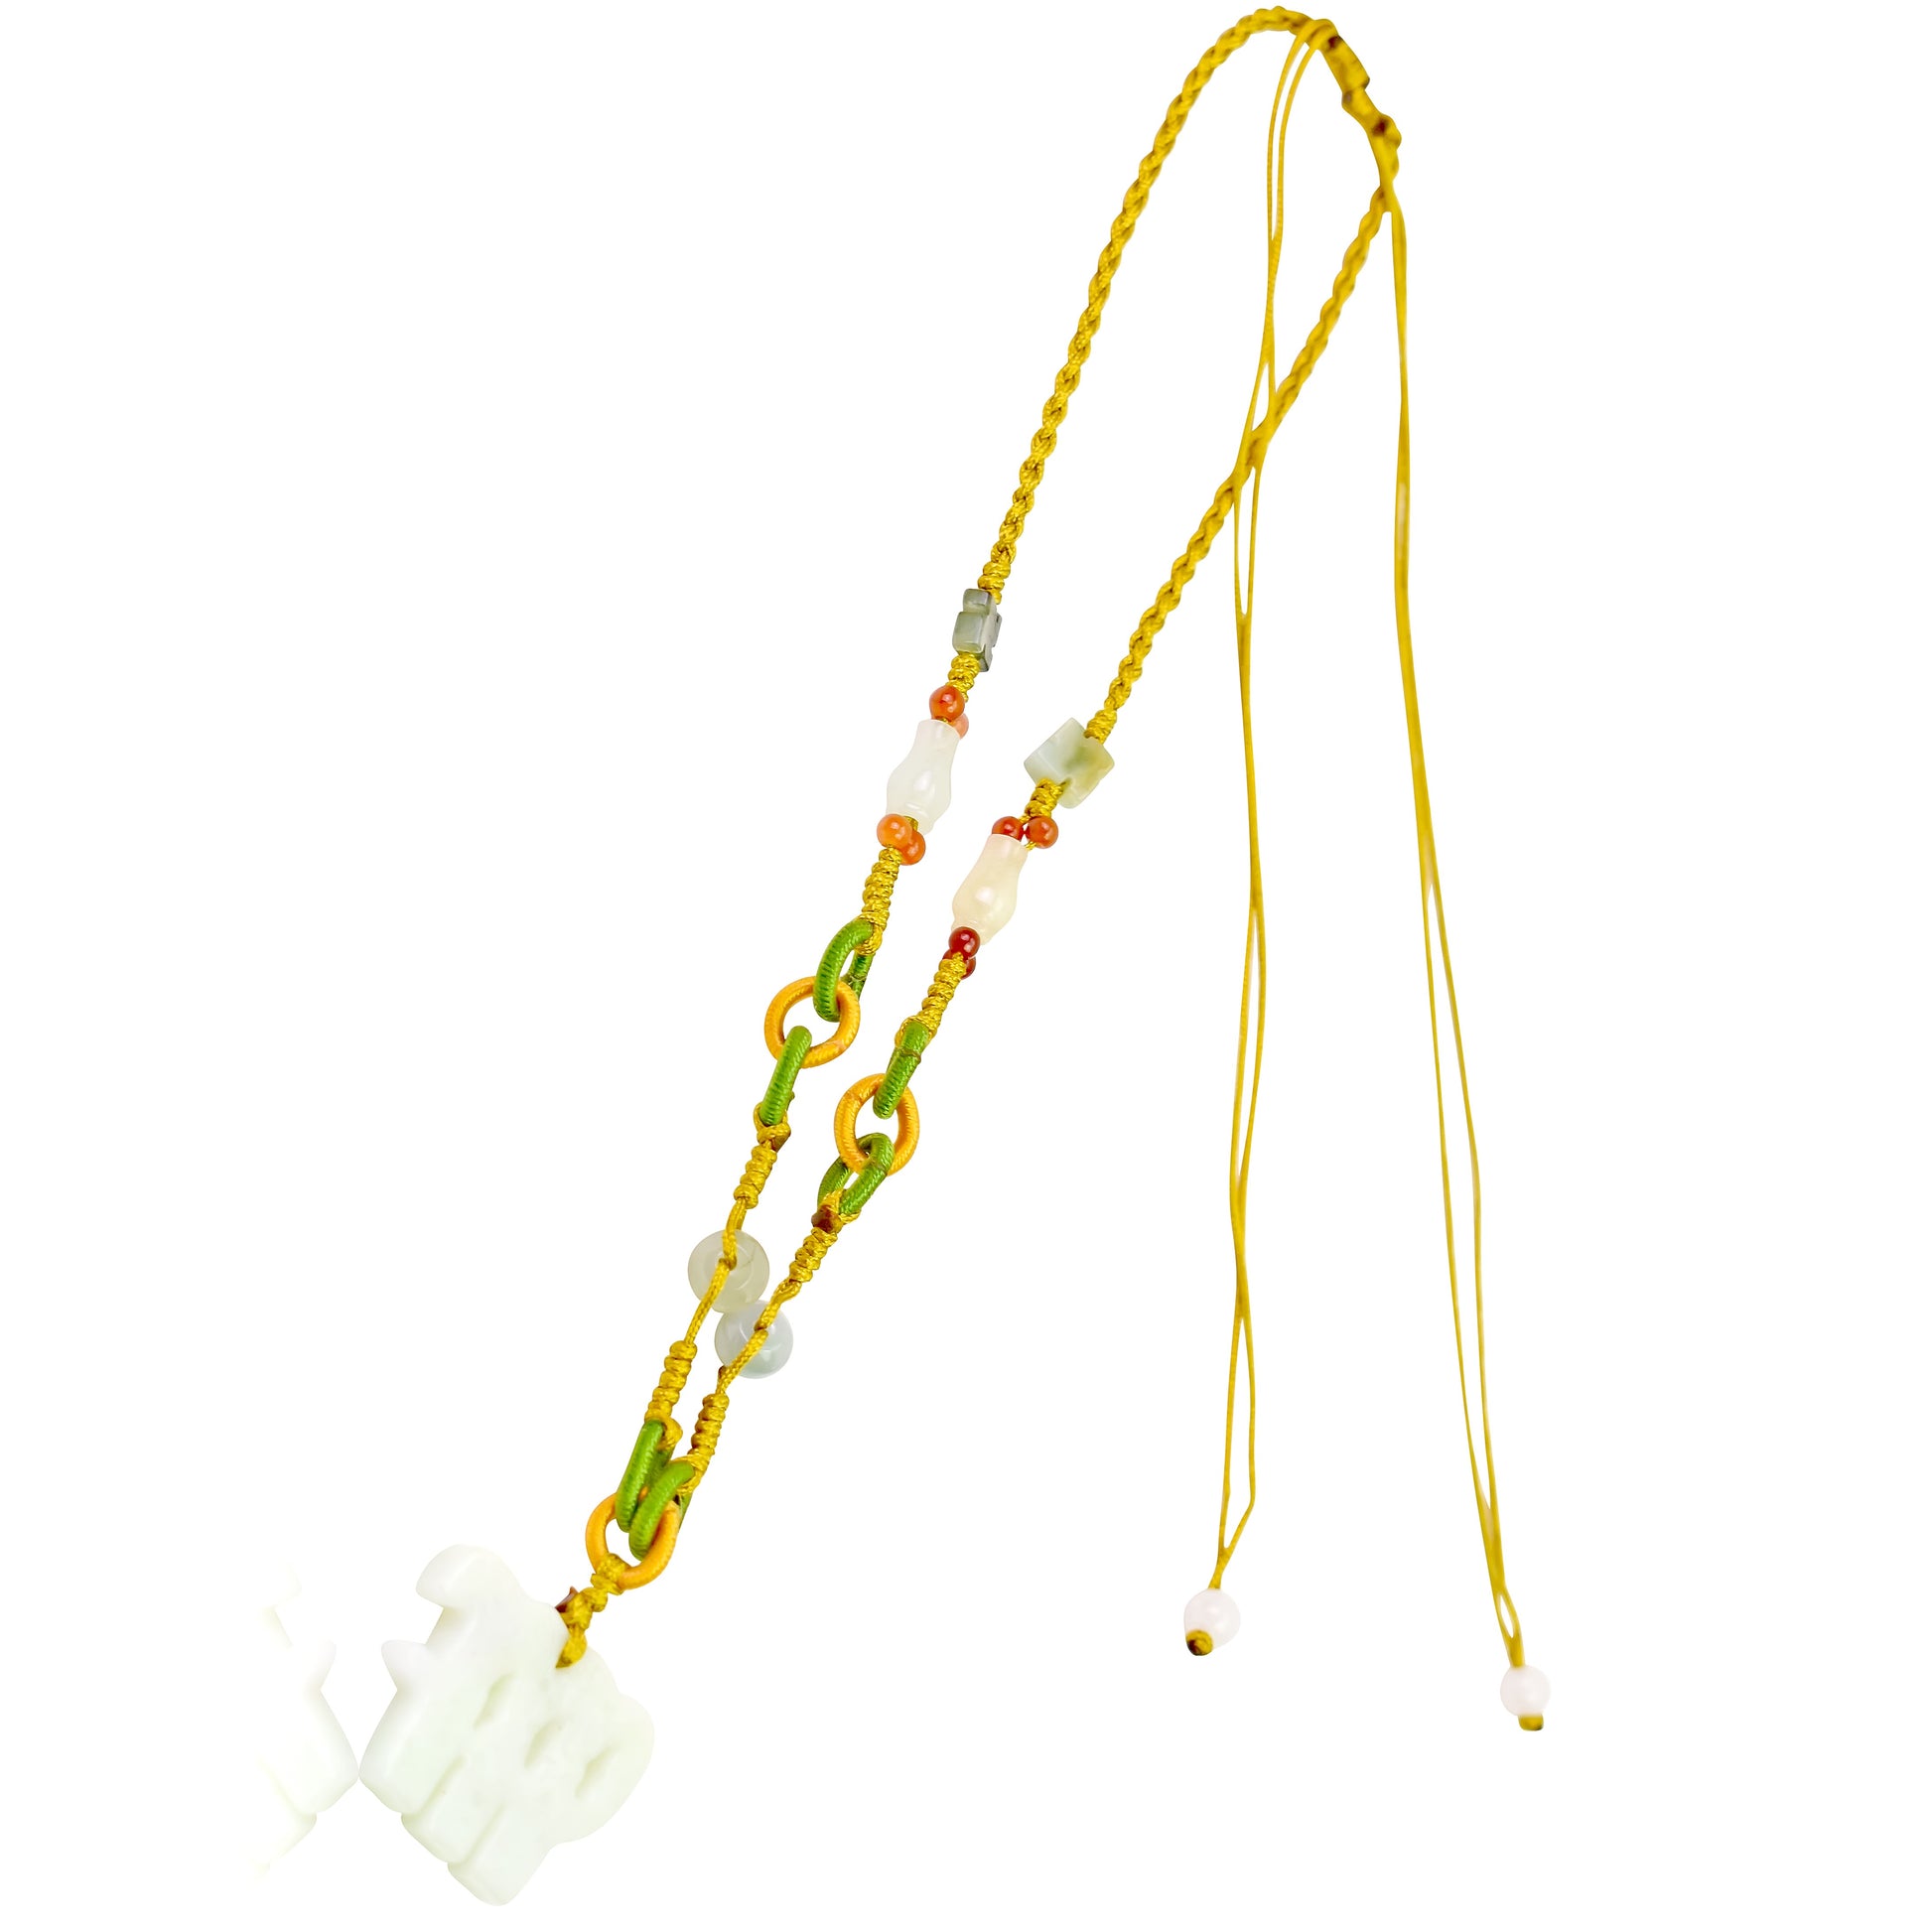 Celebrate Your Virgo Balance Nature with a Handcrafted Jade Necklace made with Yellow Cord